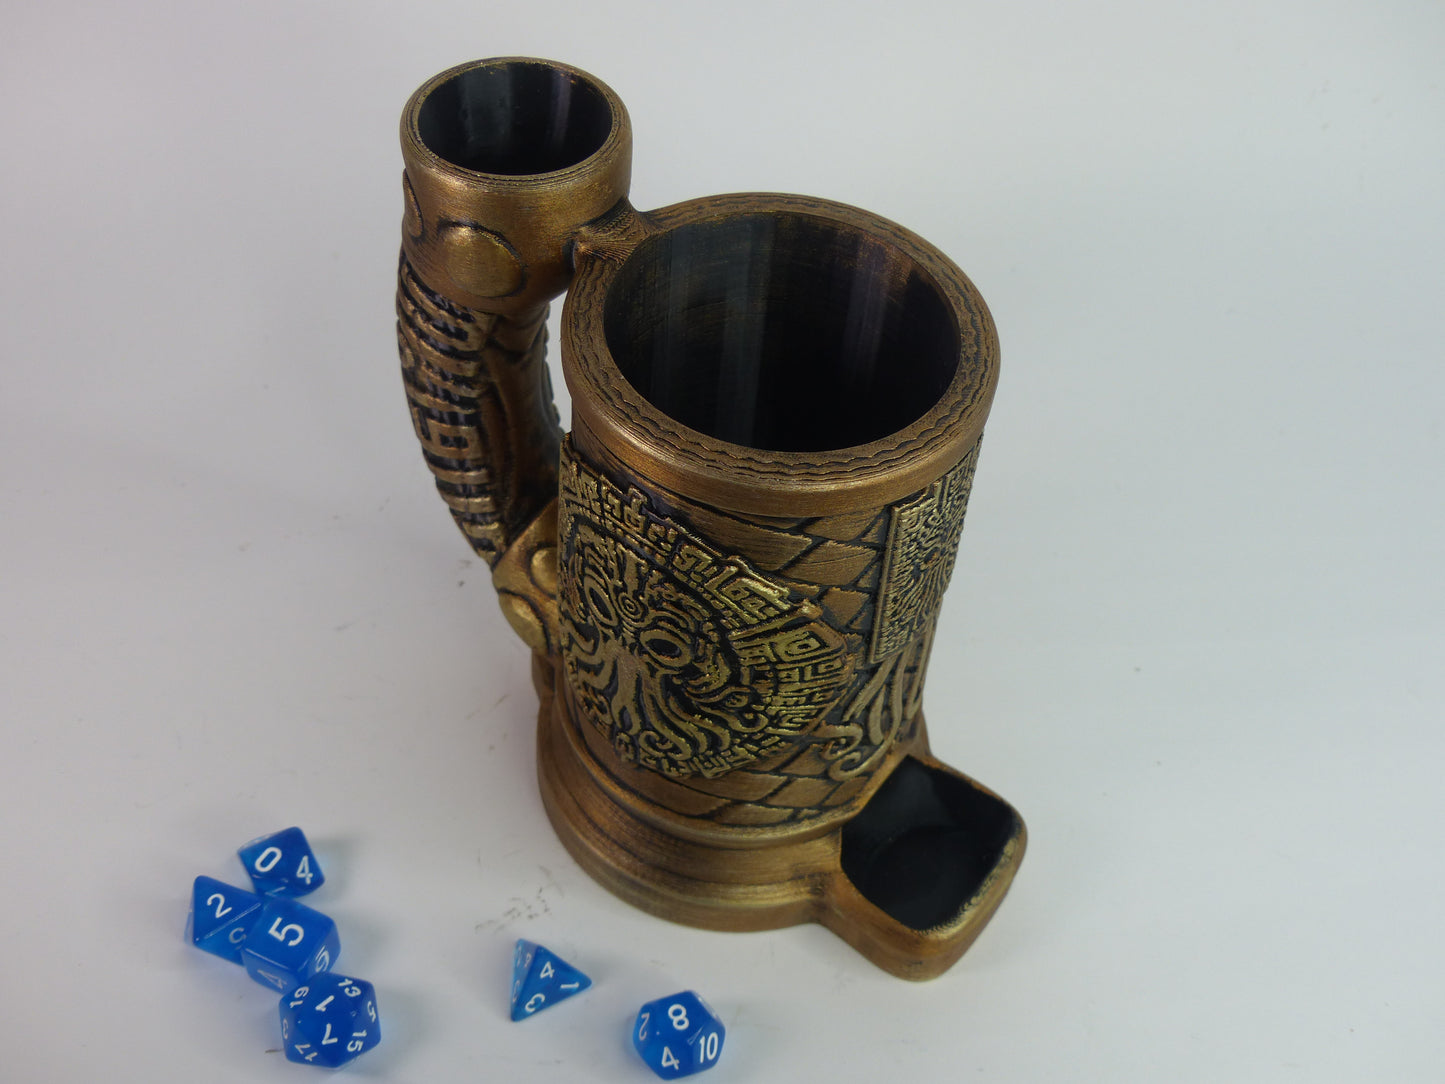 Cthulhu Can Cosy/Cozy DnD Dice Tower - 3D printed and hand painted - Can be personalised!